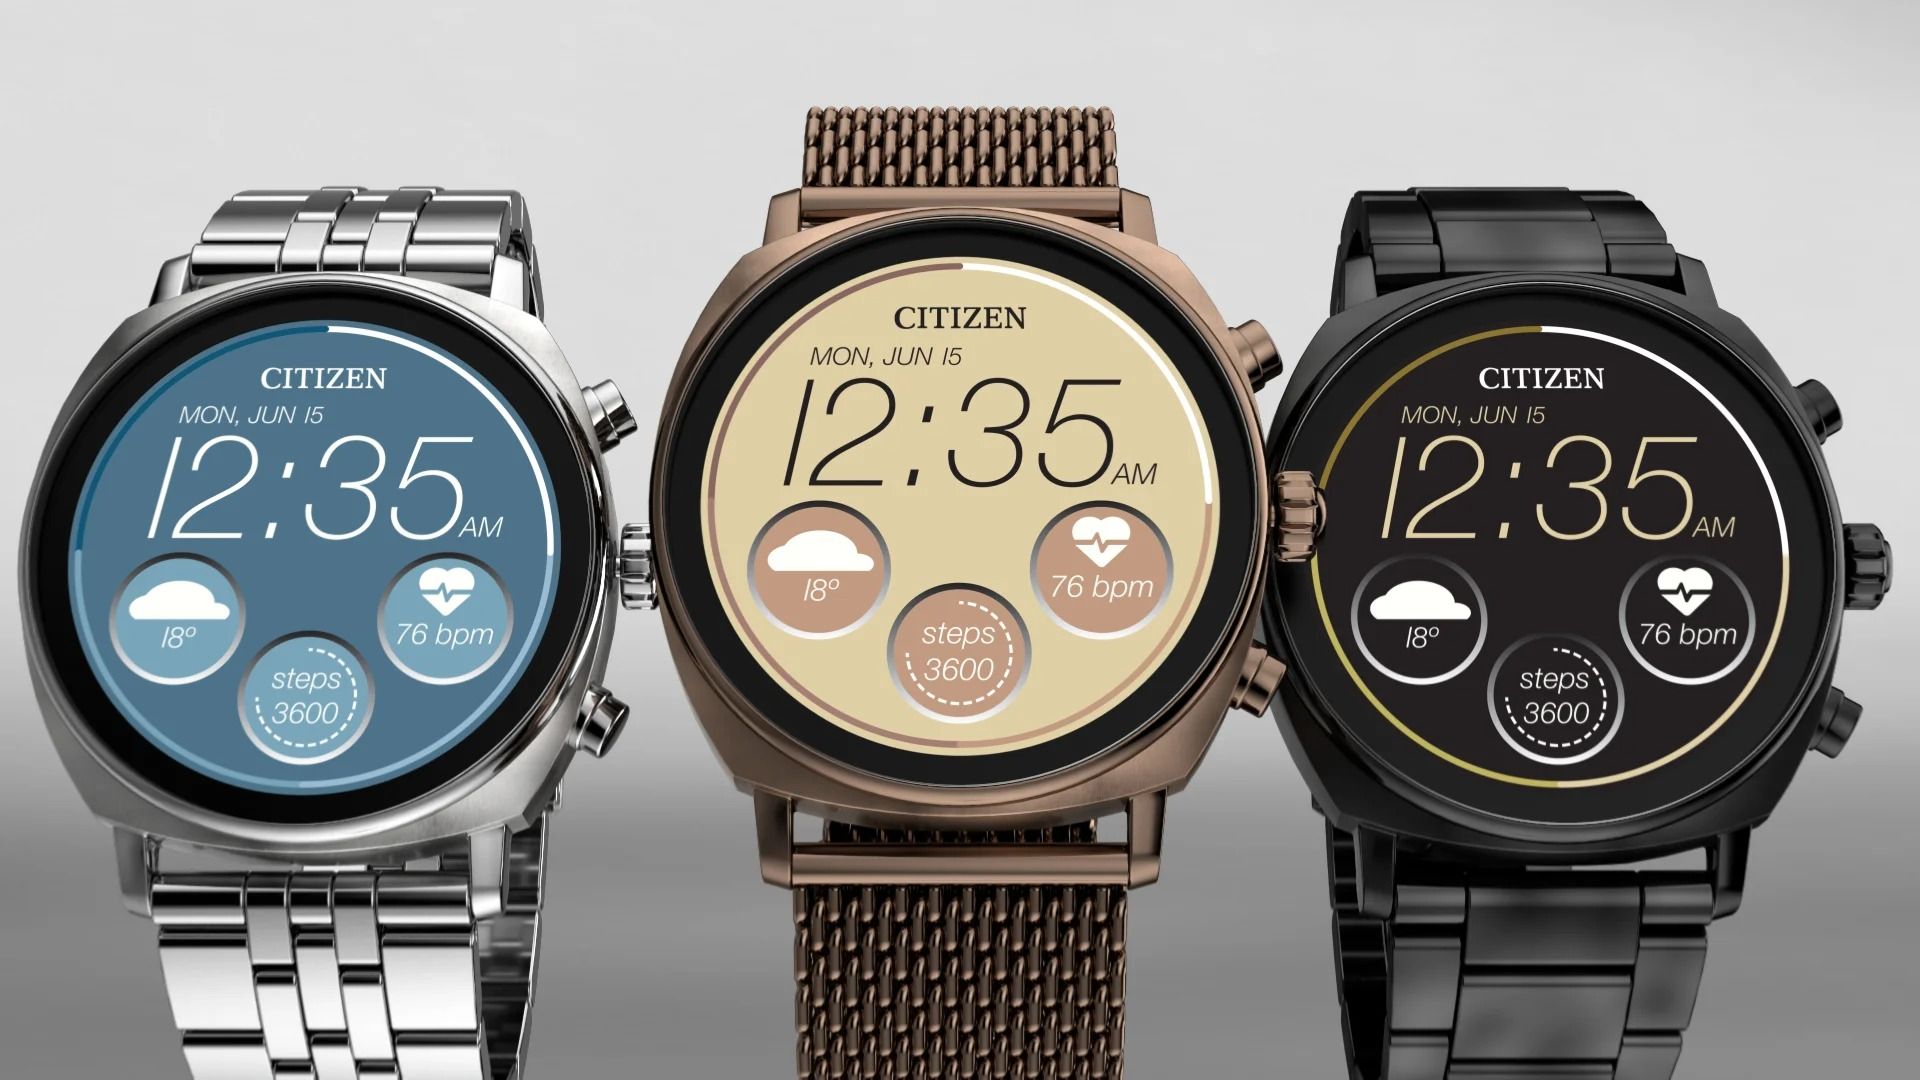 The Citizen Space Technology smartwatch is finally available for pre-order.